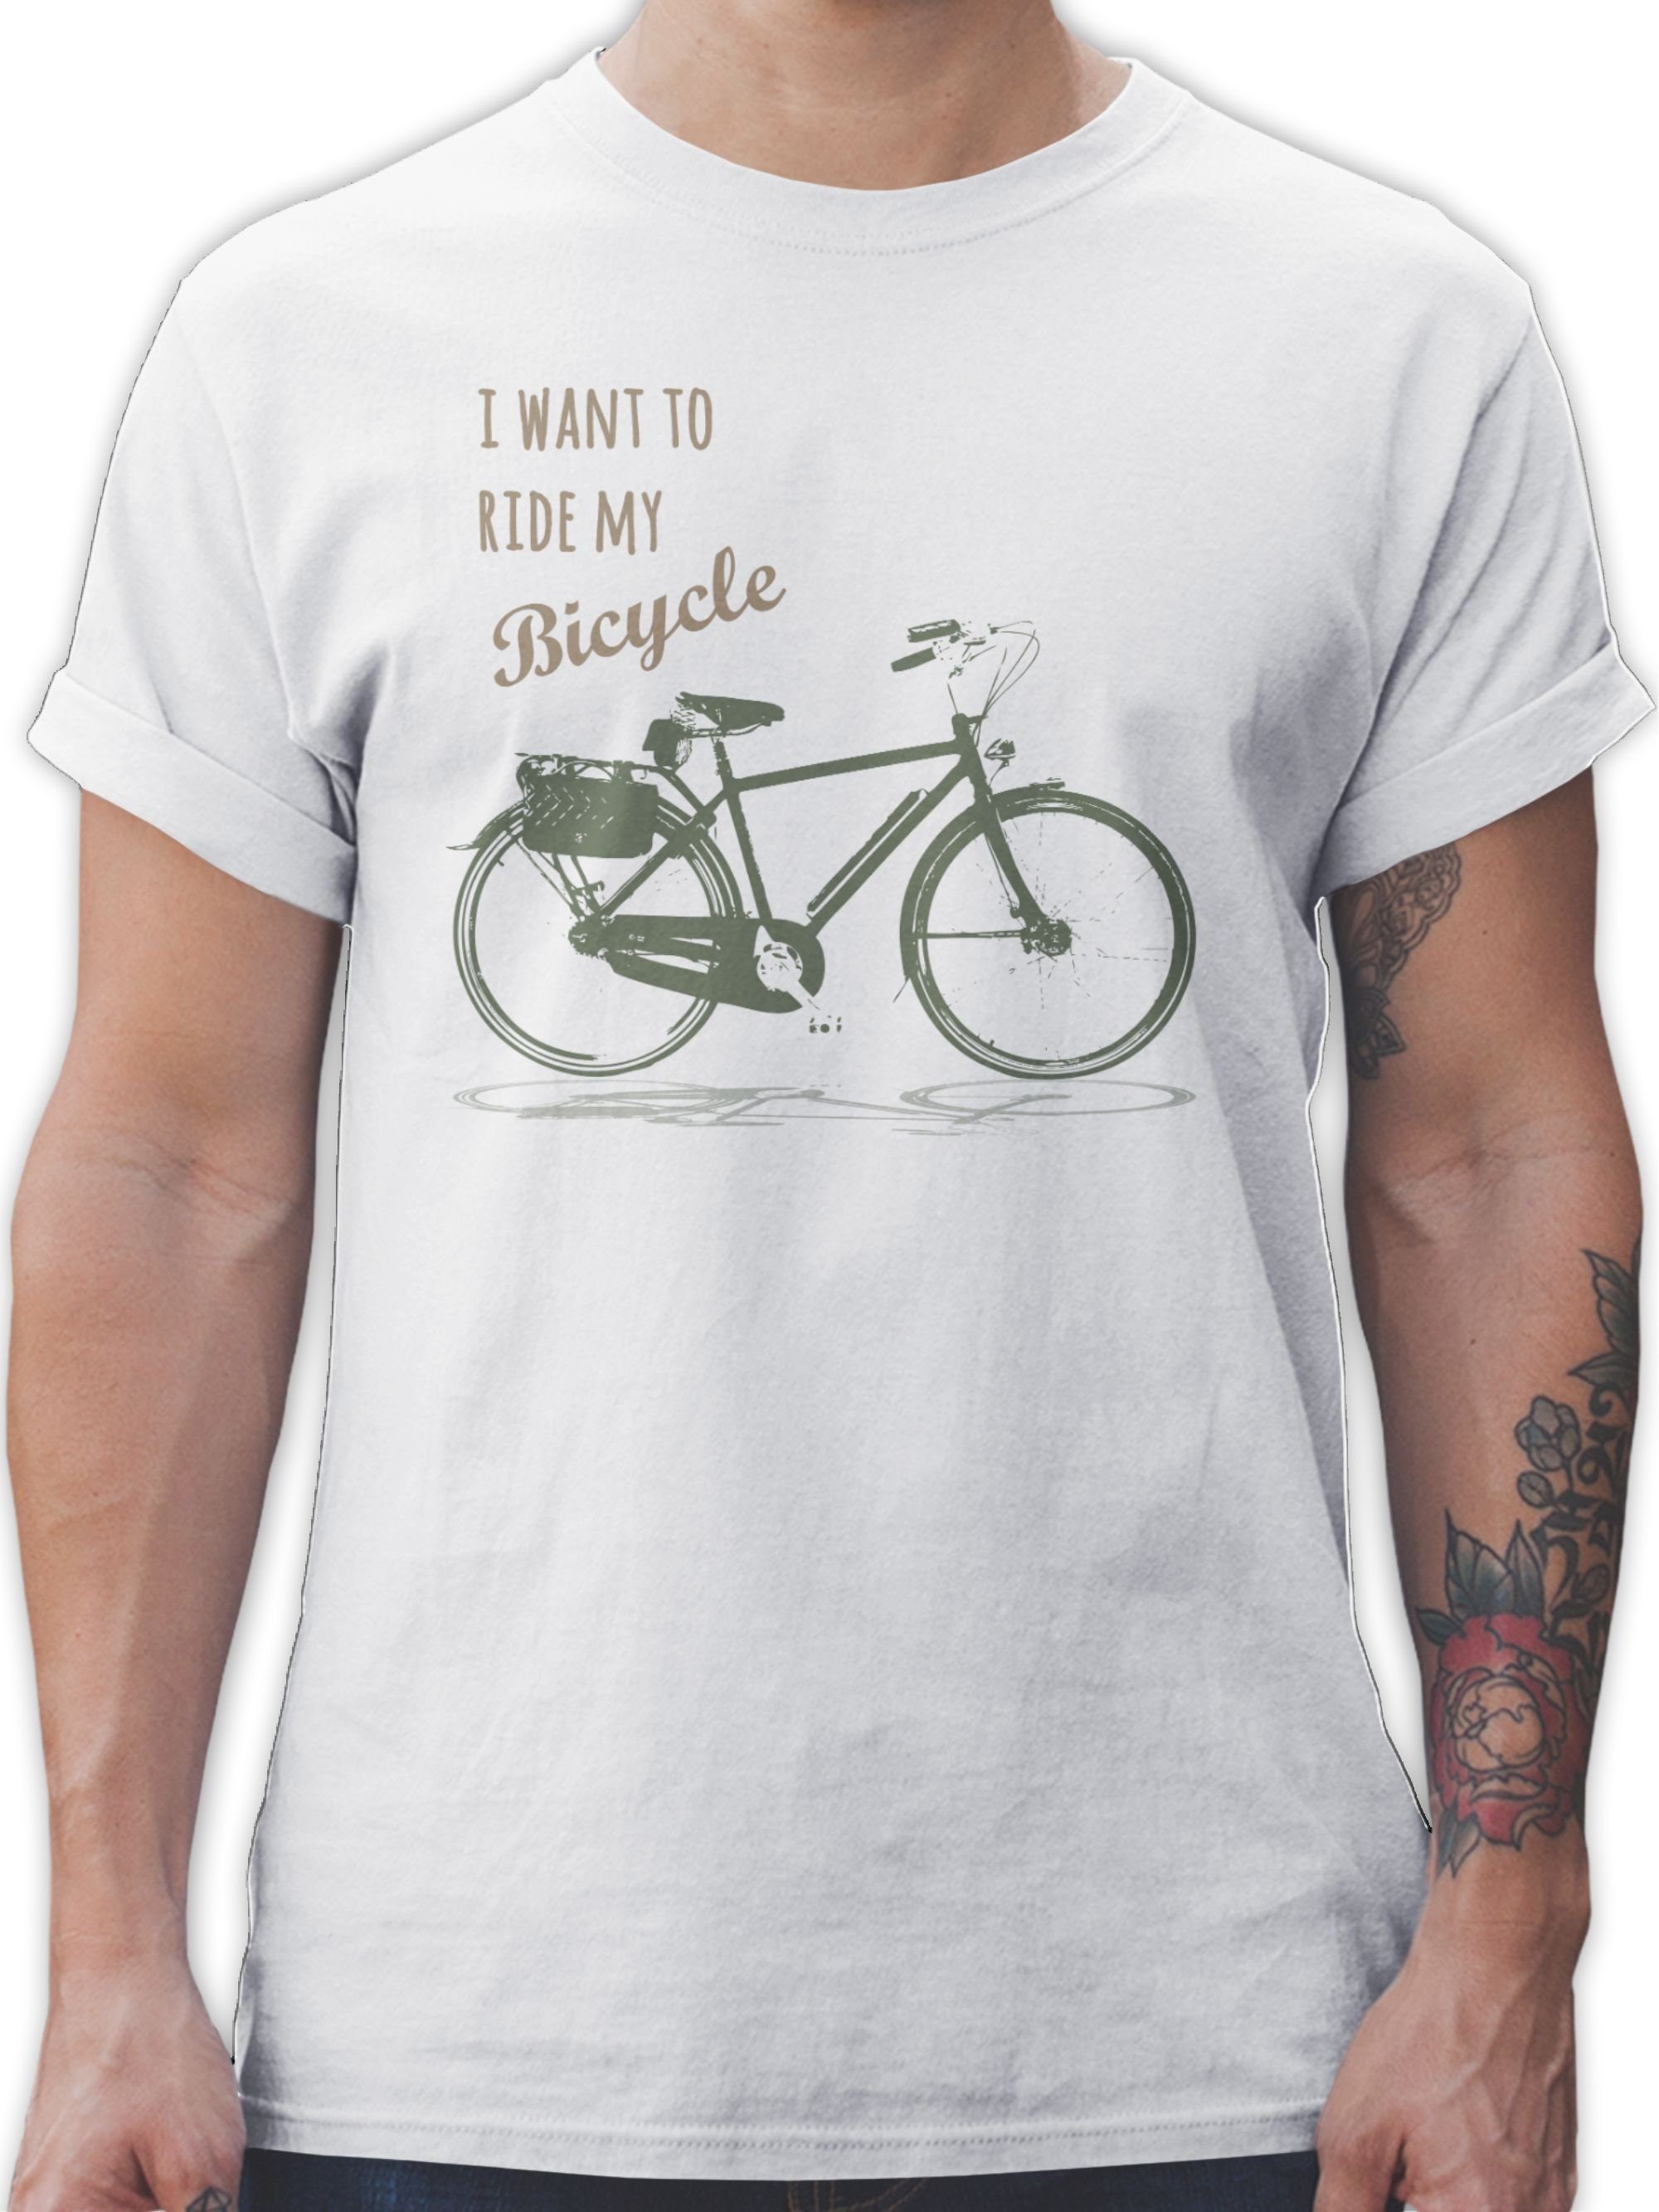 Shirtracer T-Shirt I want to ride my bicycle Vintage Retro 3 Weiß